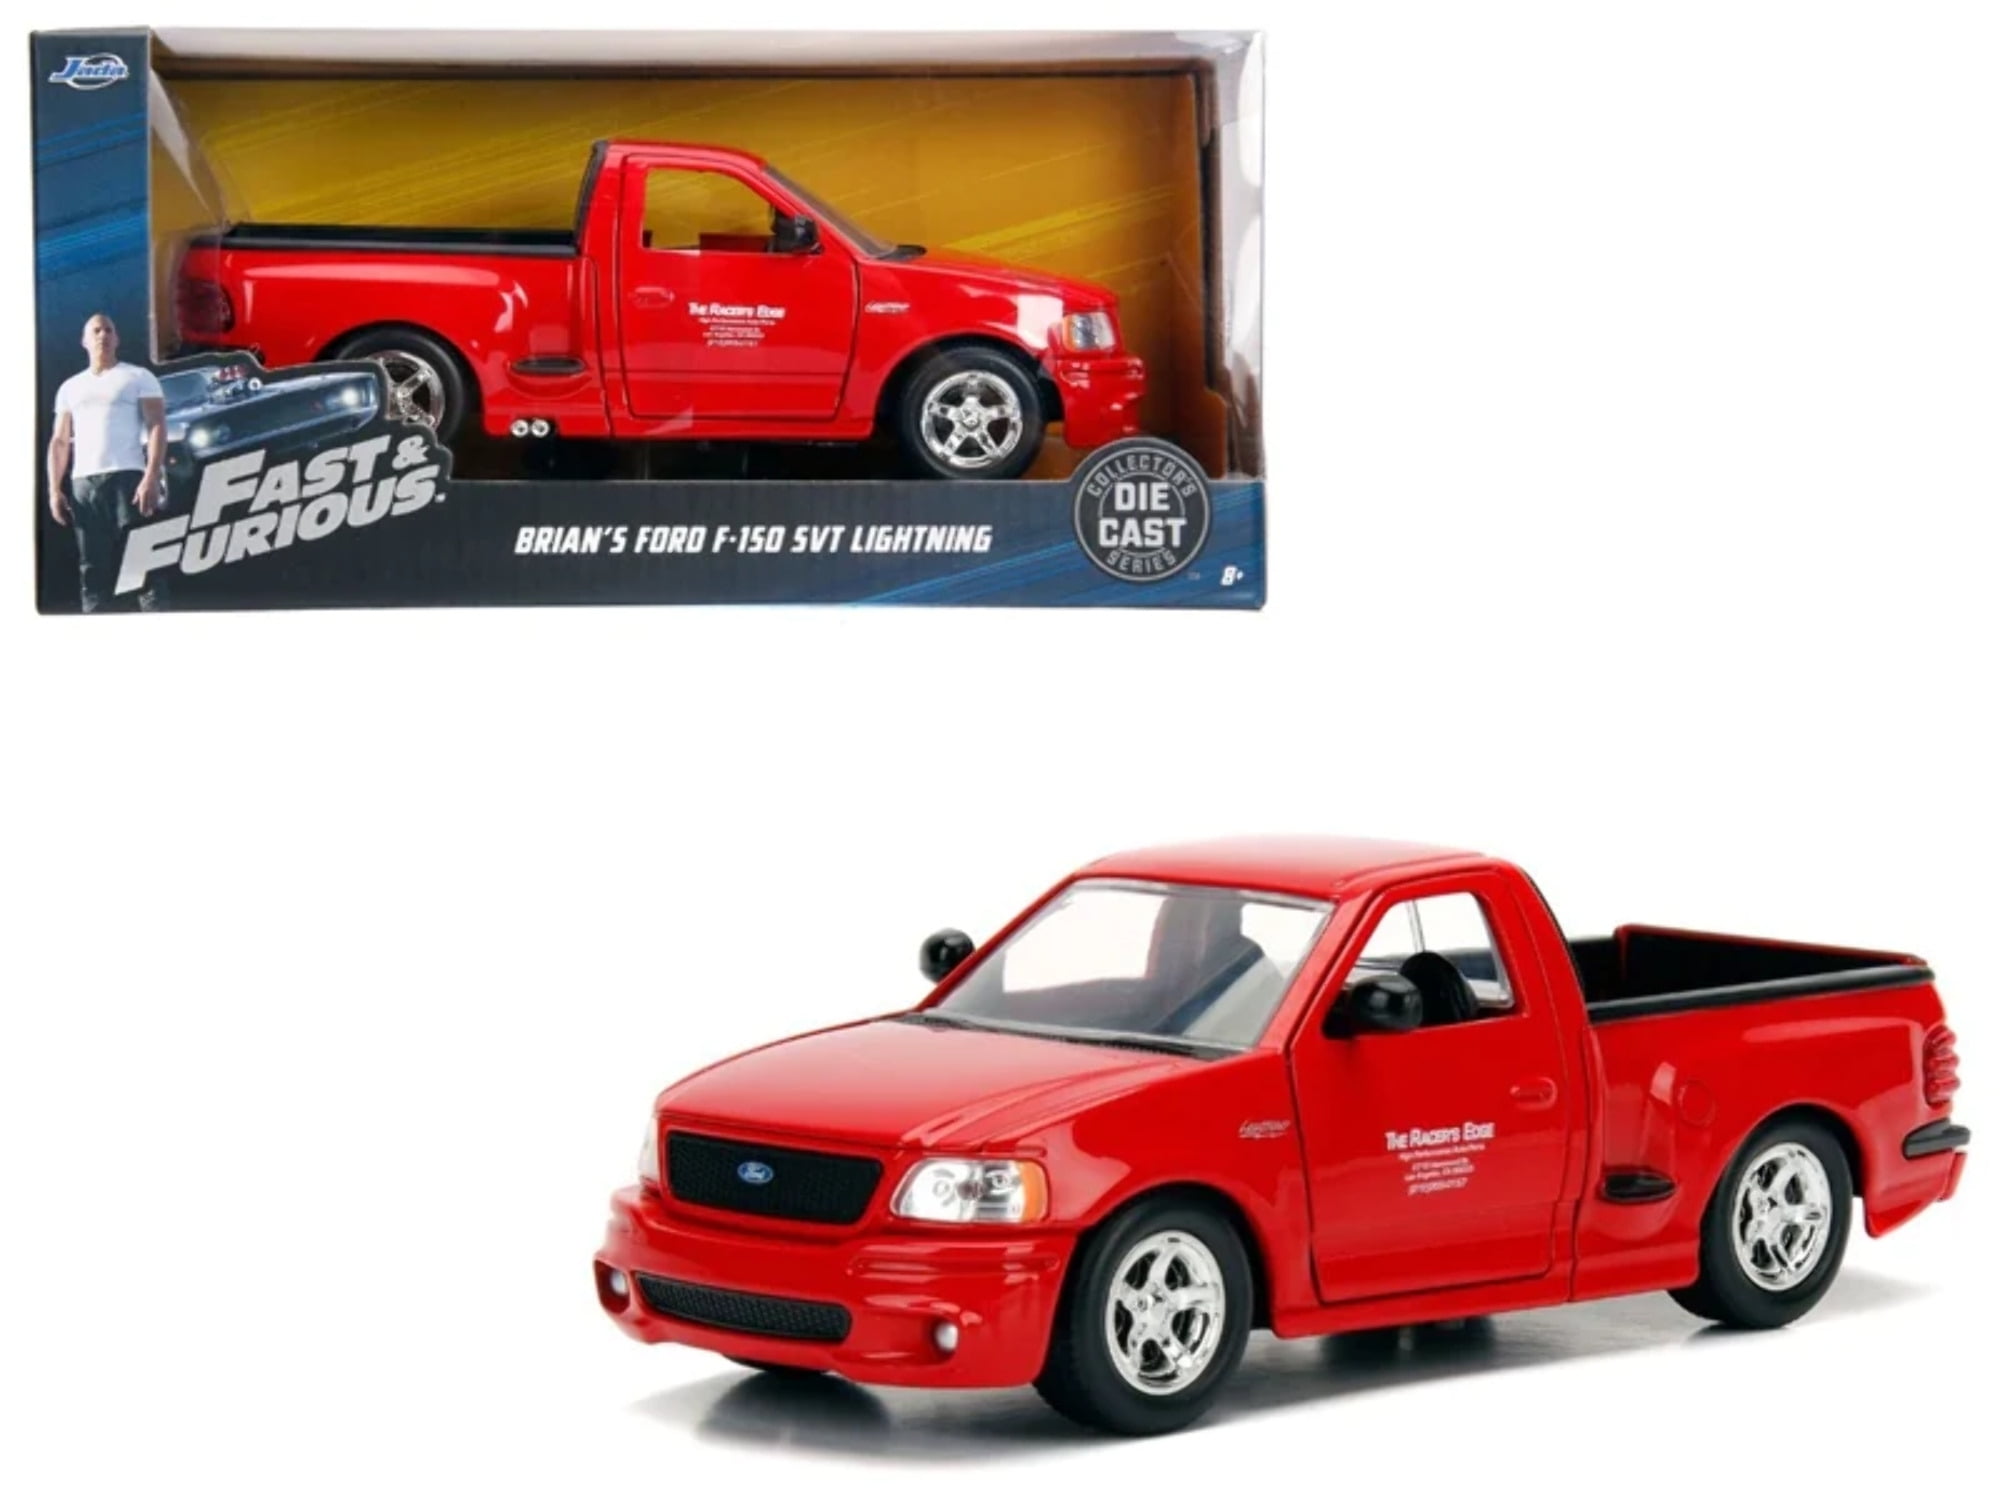 Brians Ford F-150 Svt Lightning Pickup Truck Red Fast & Furious Movie